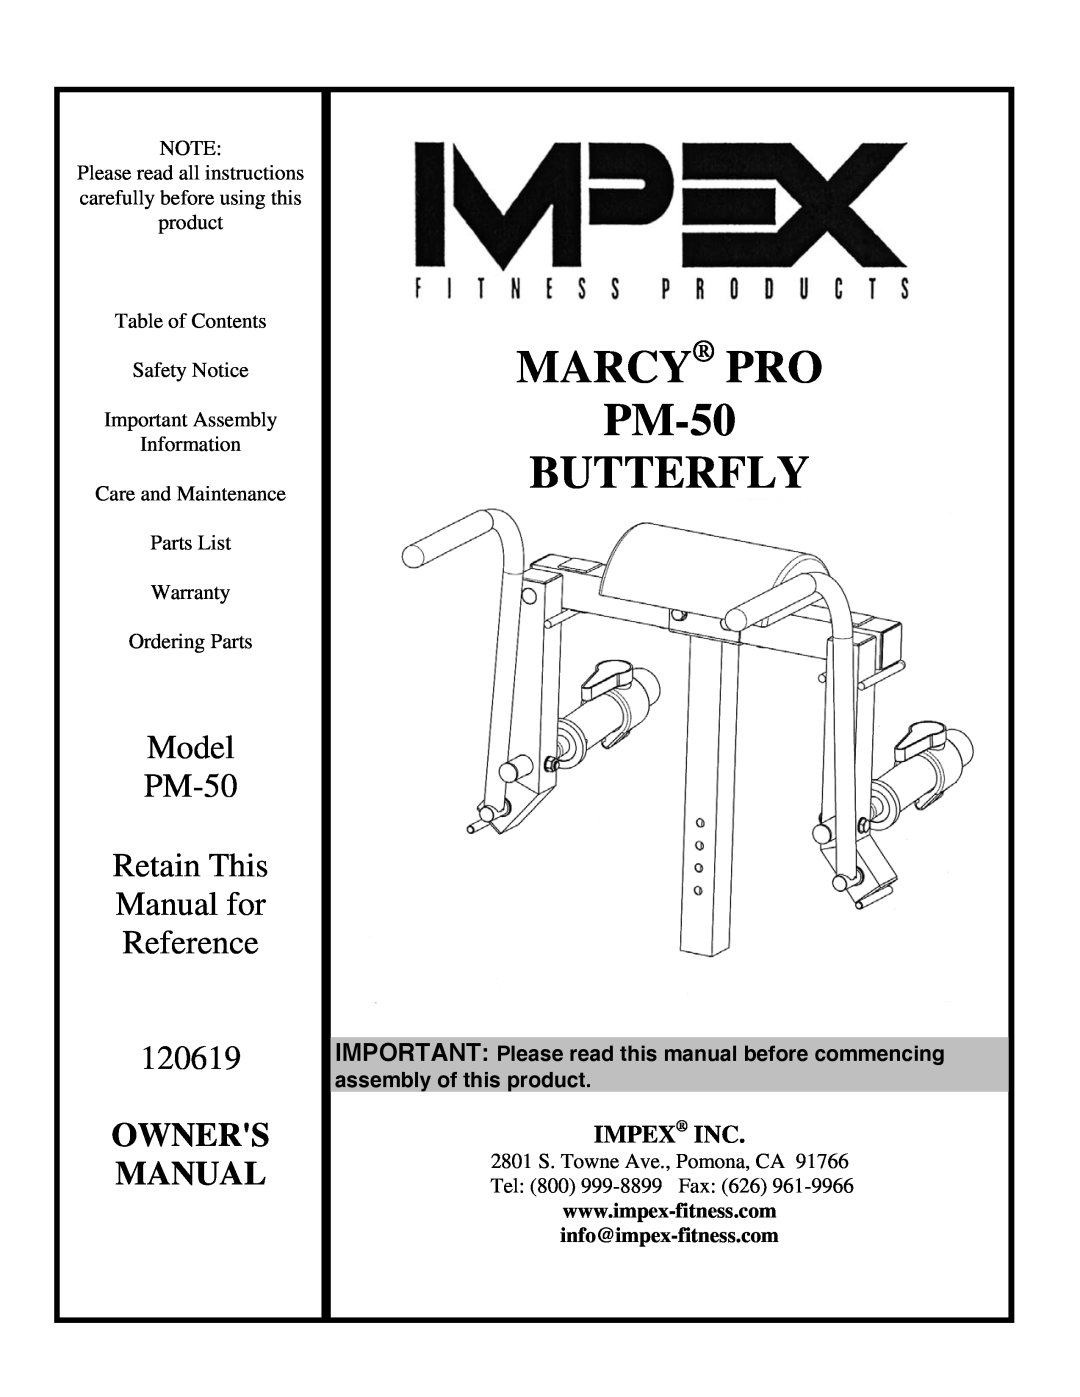 Impex manual MARCY PRO PM-50 BUTTERFLY, Model PM-50 Retain This Manual for Reference 120619, Owners Manual, Impex Inc 